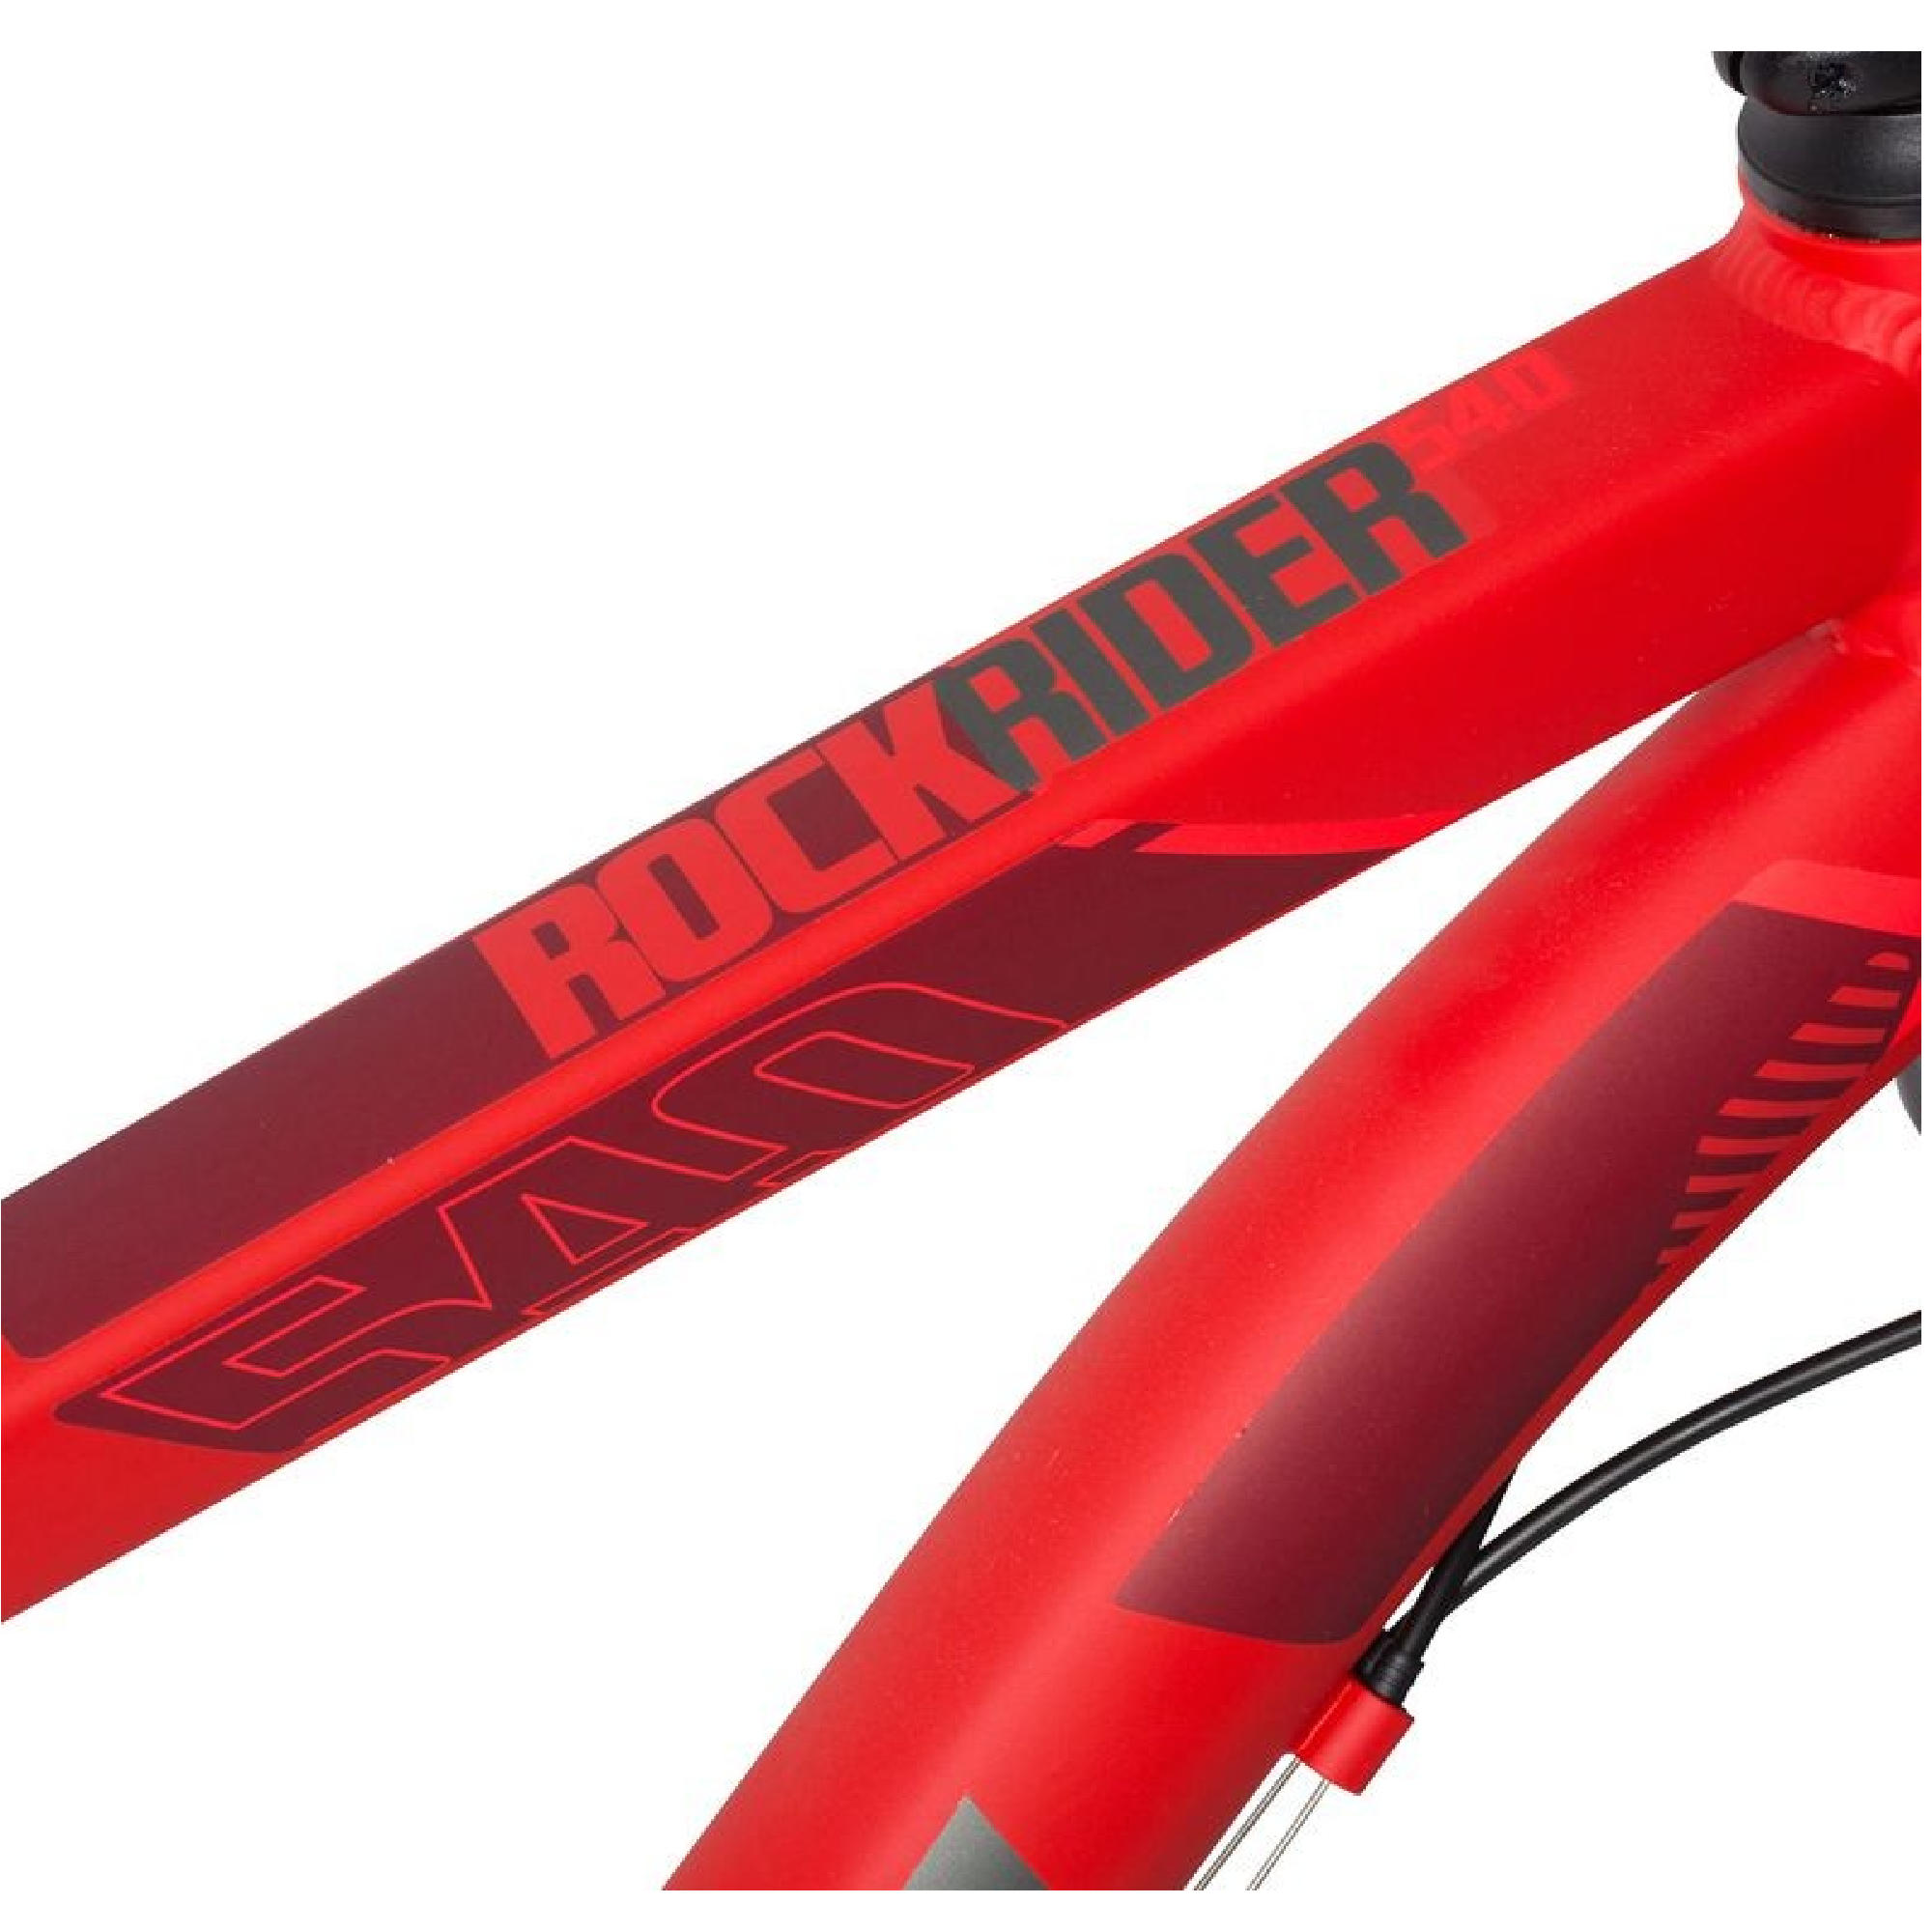 btwin 540 red